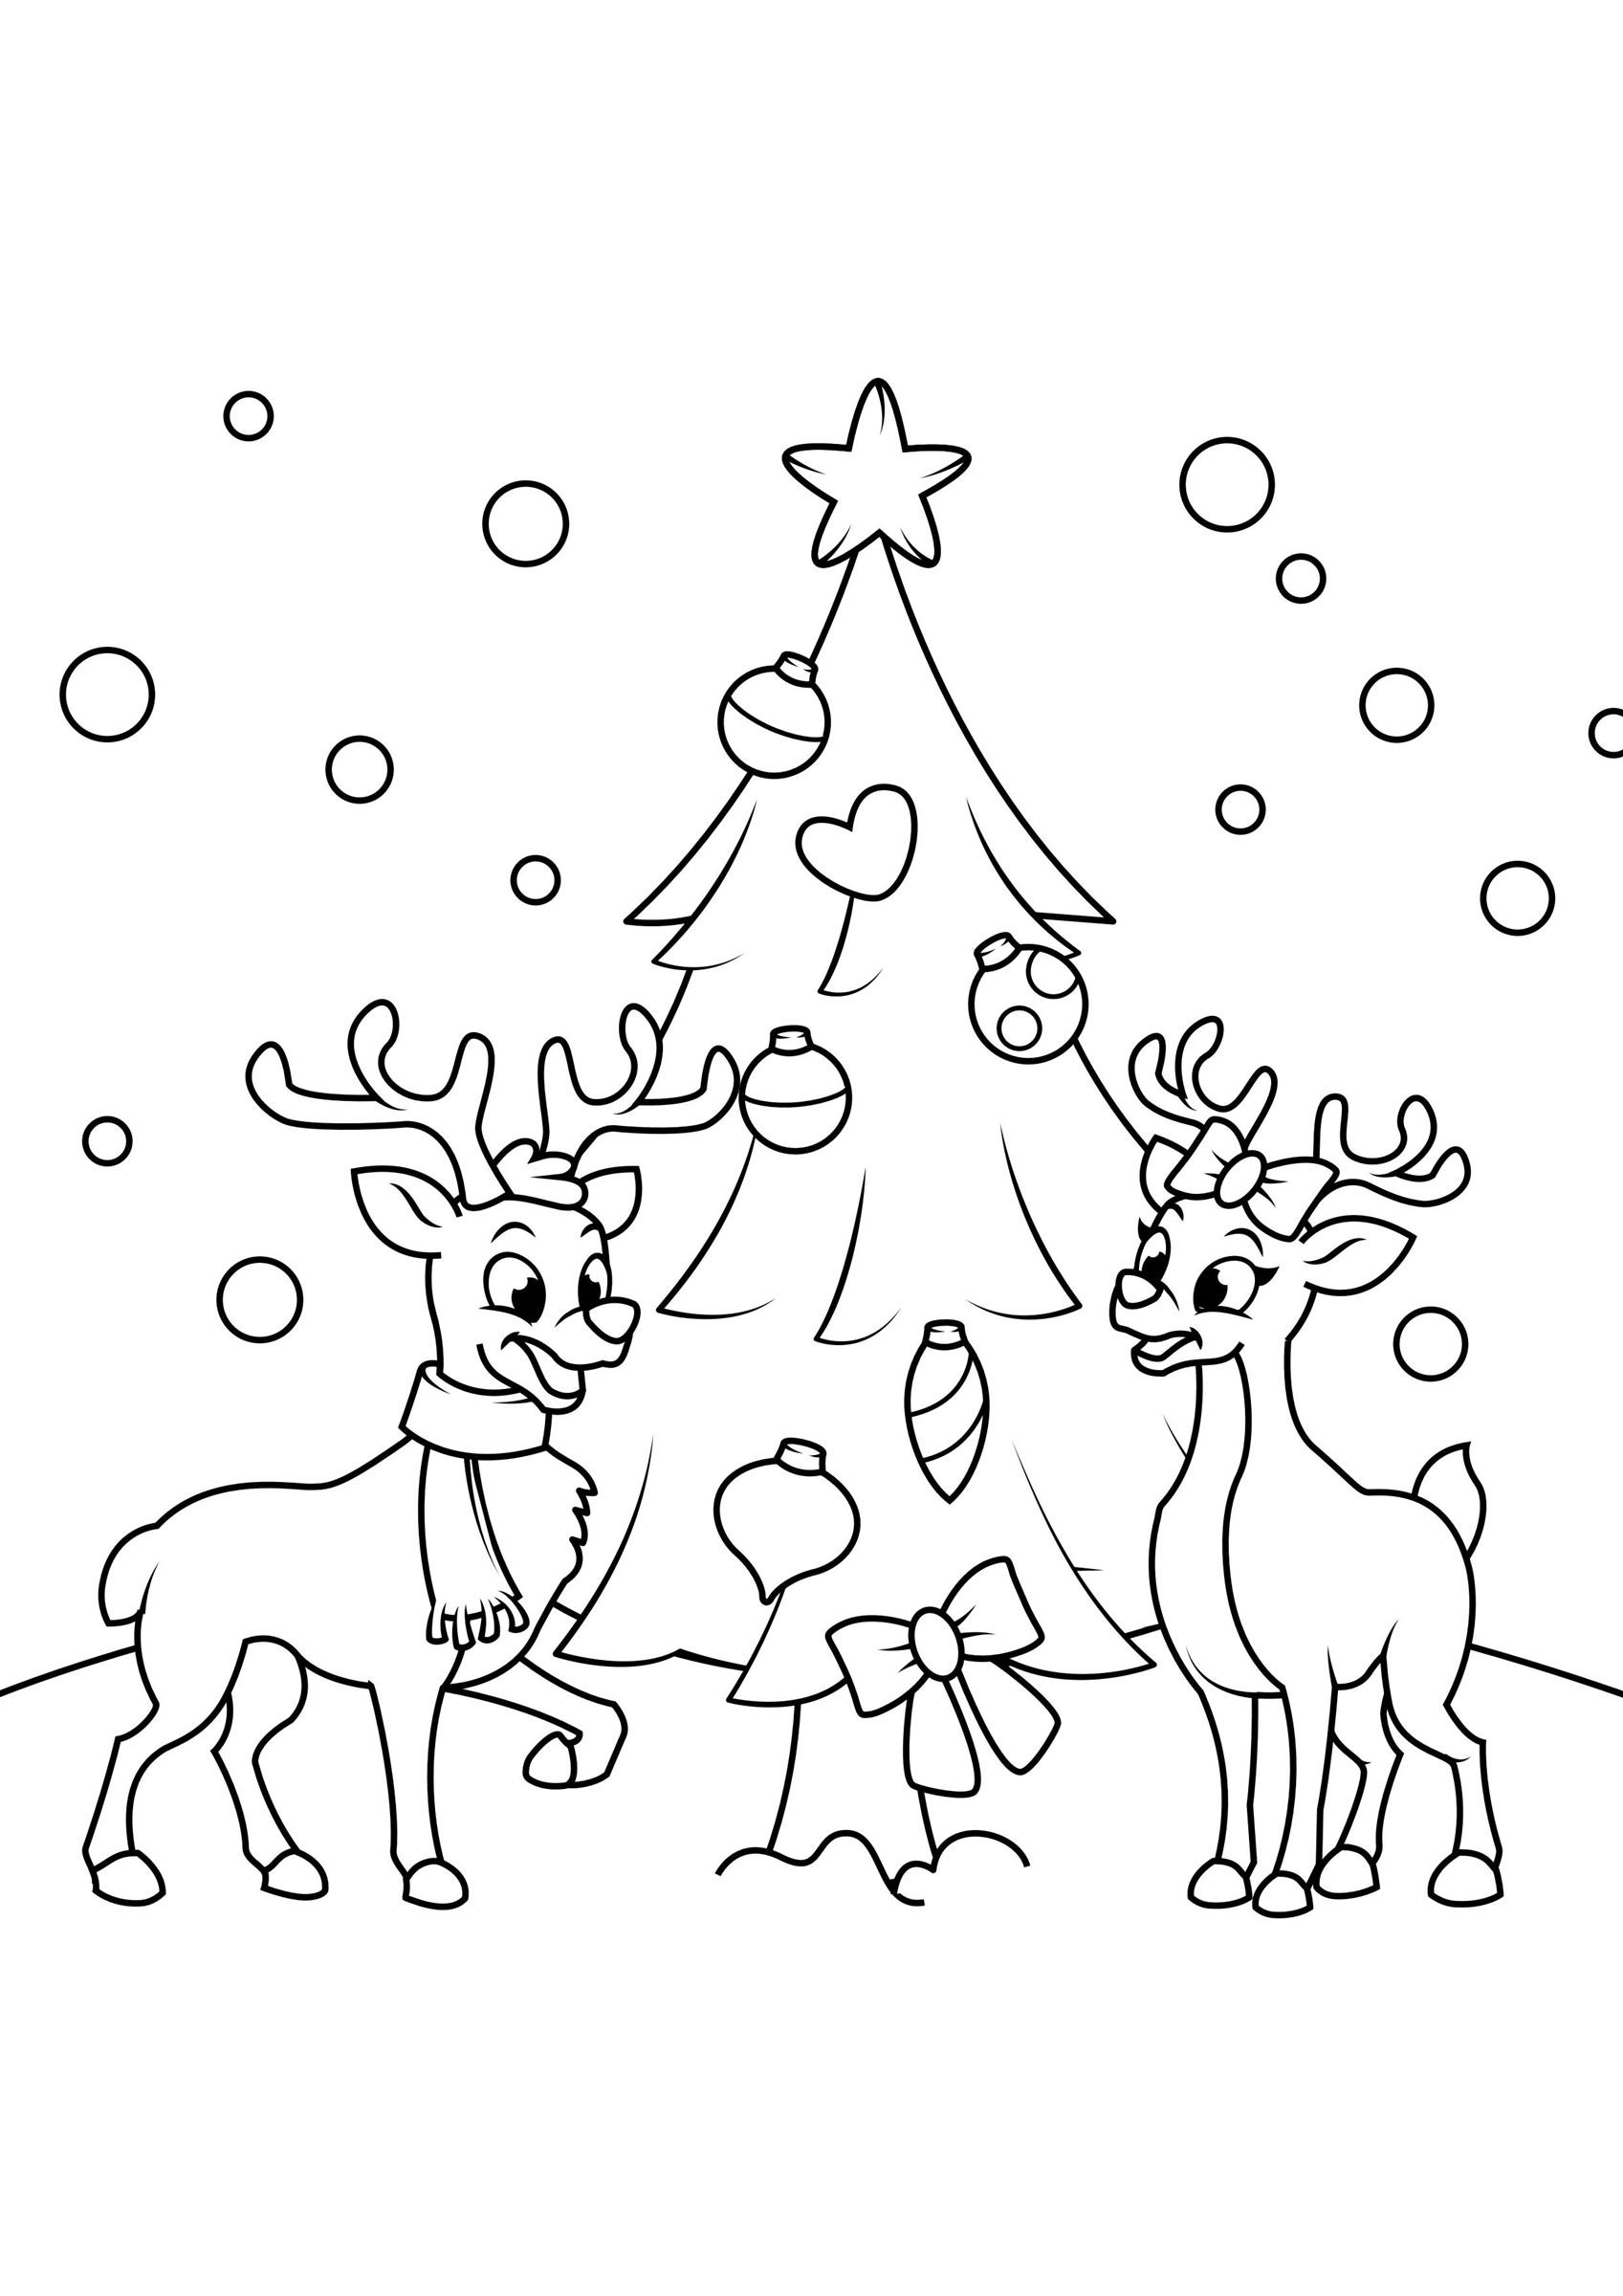 Coloring page Christmas tree with reindeer